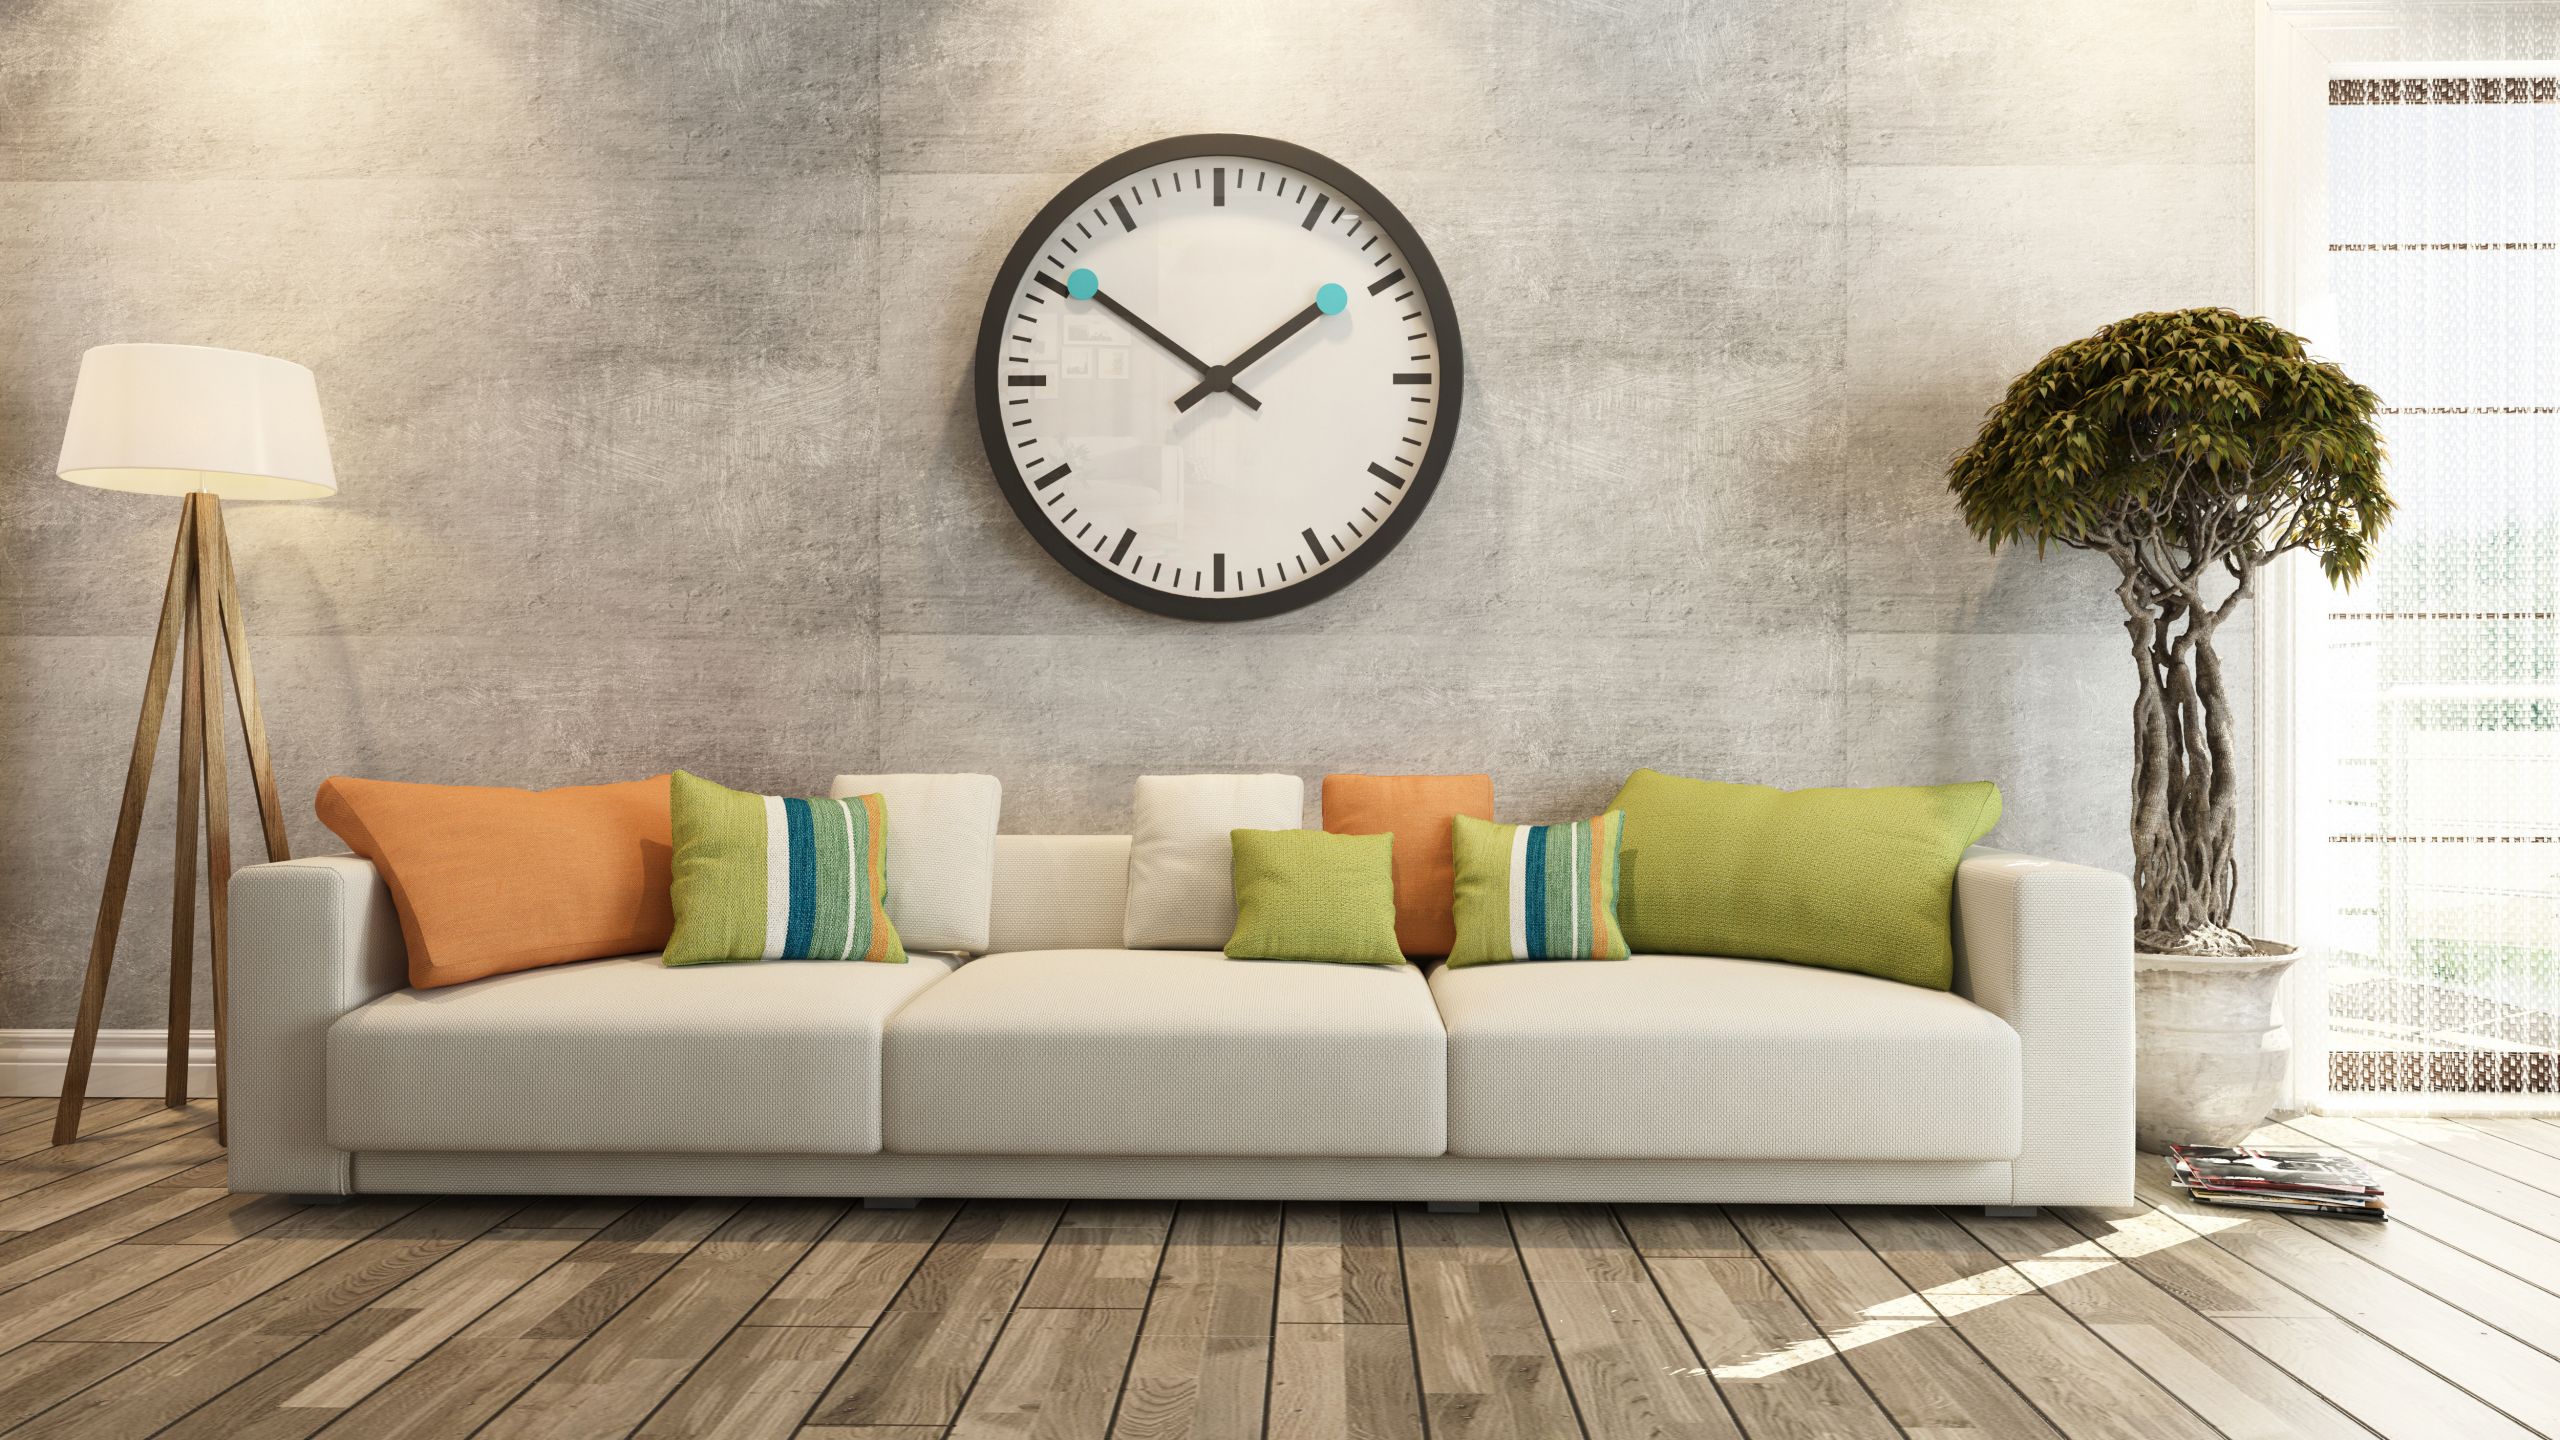 Wall Clock For Living Room
 How to Hang a Giant Wall Clock in Your Living Room